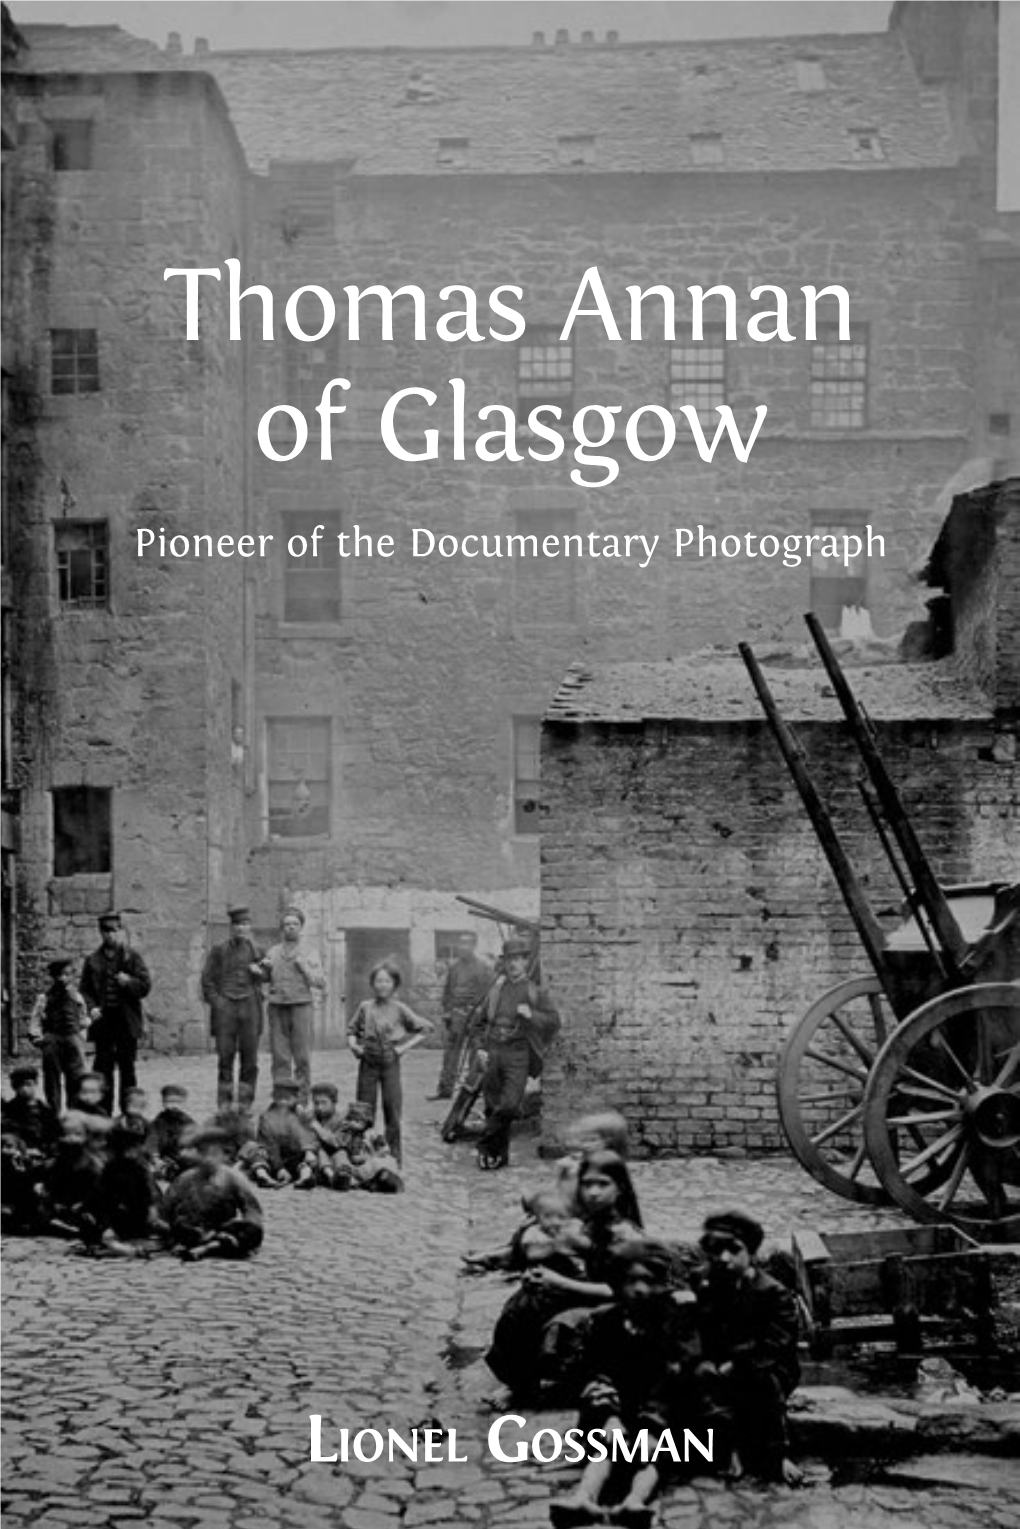 Thomas Annan of Glasgow Pioneer of the Documentary Photograph